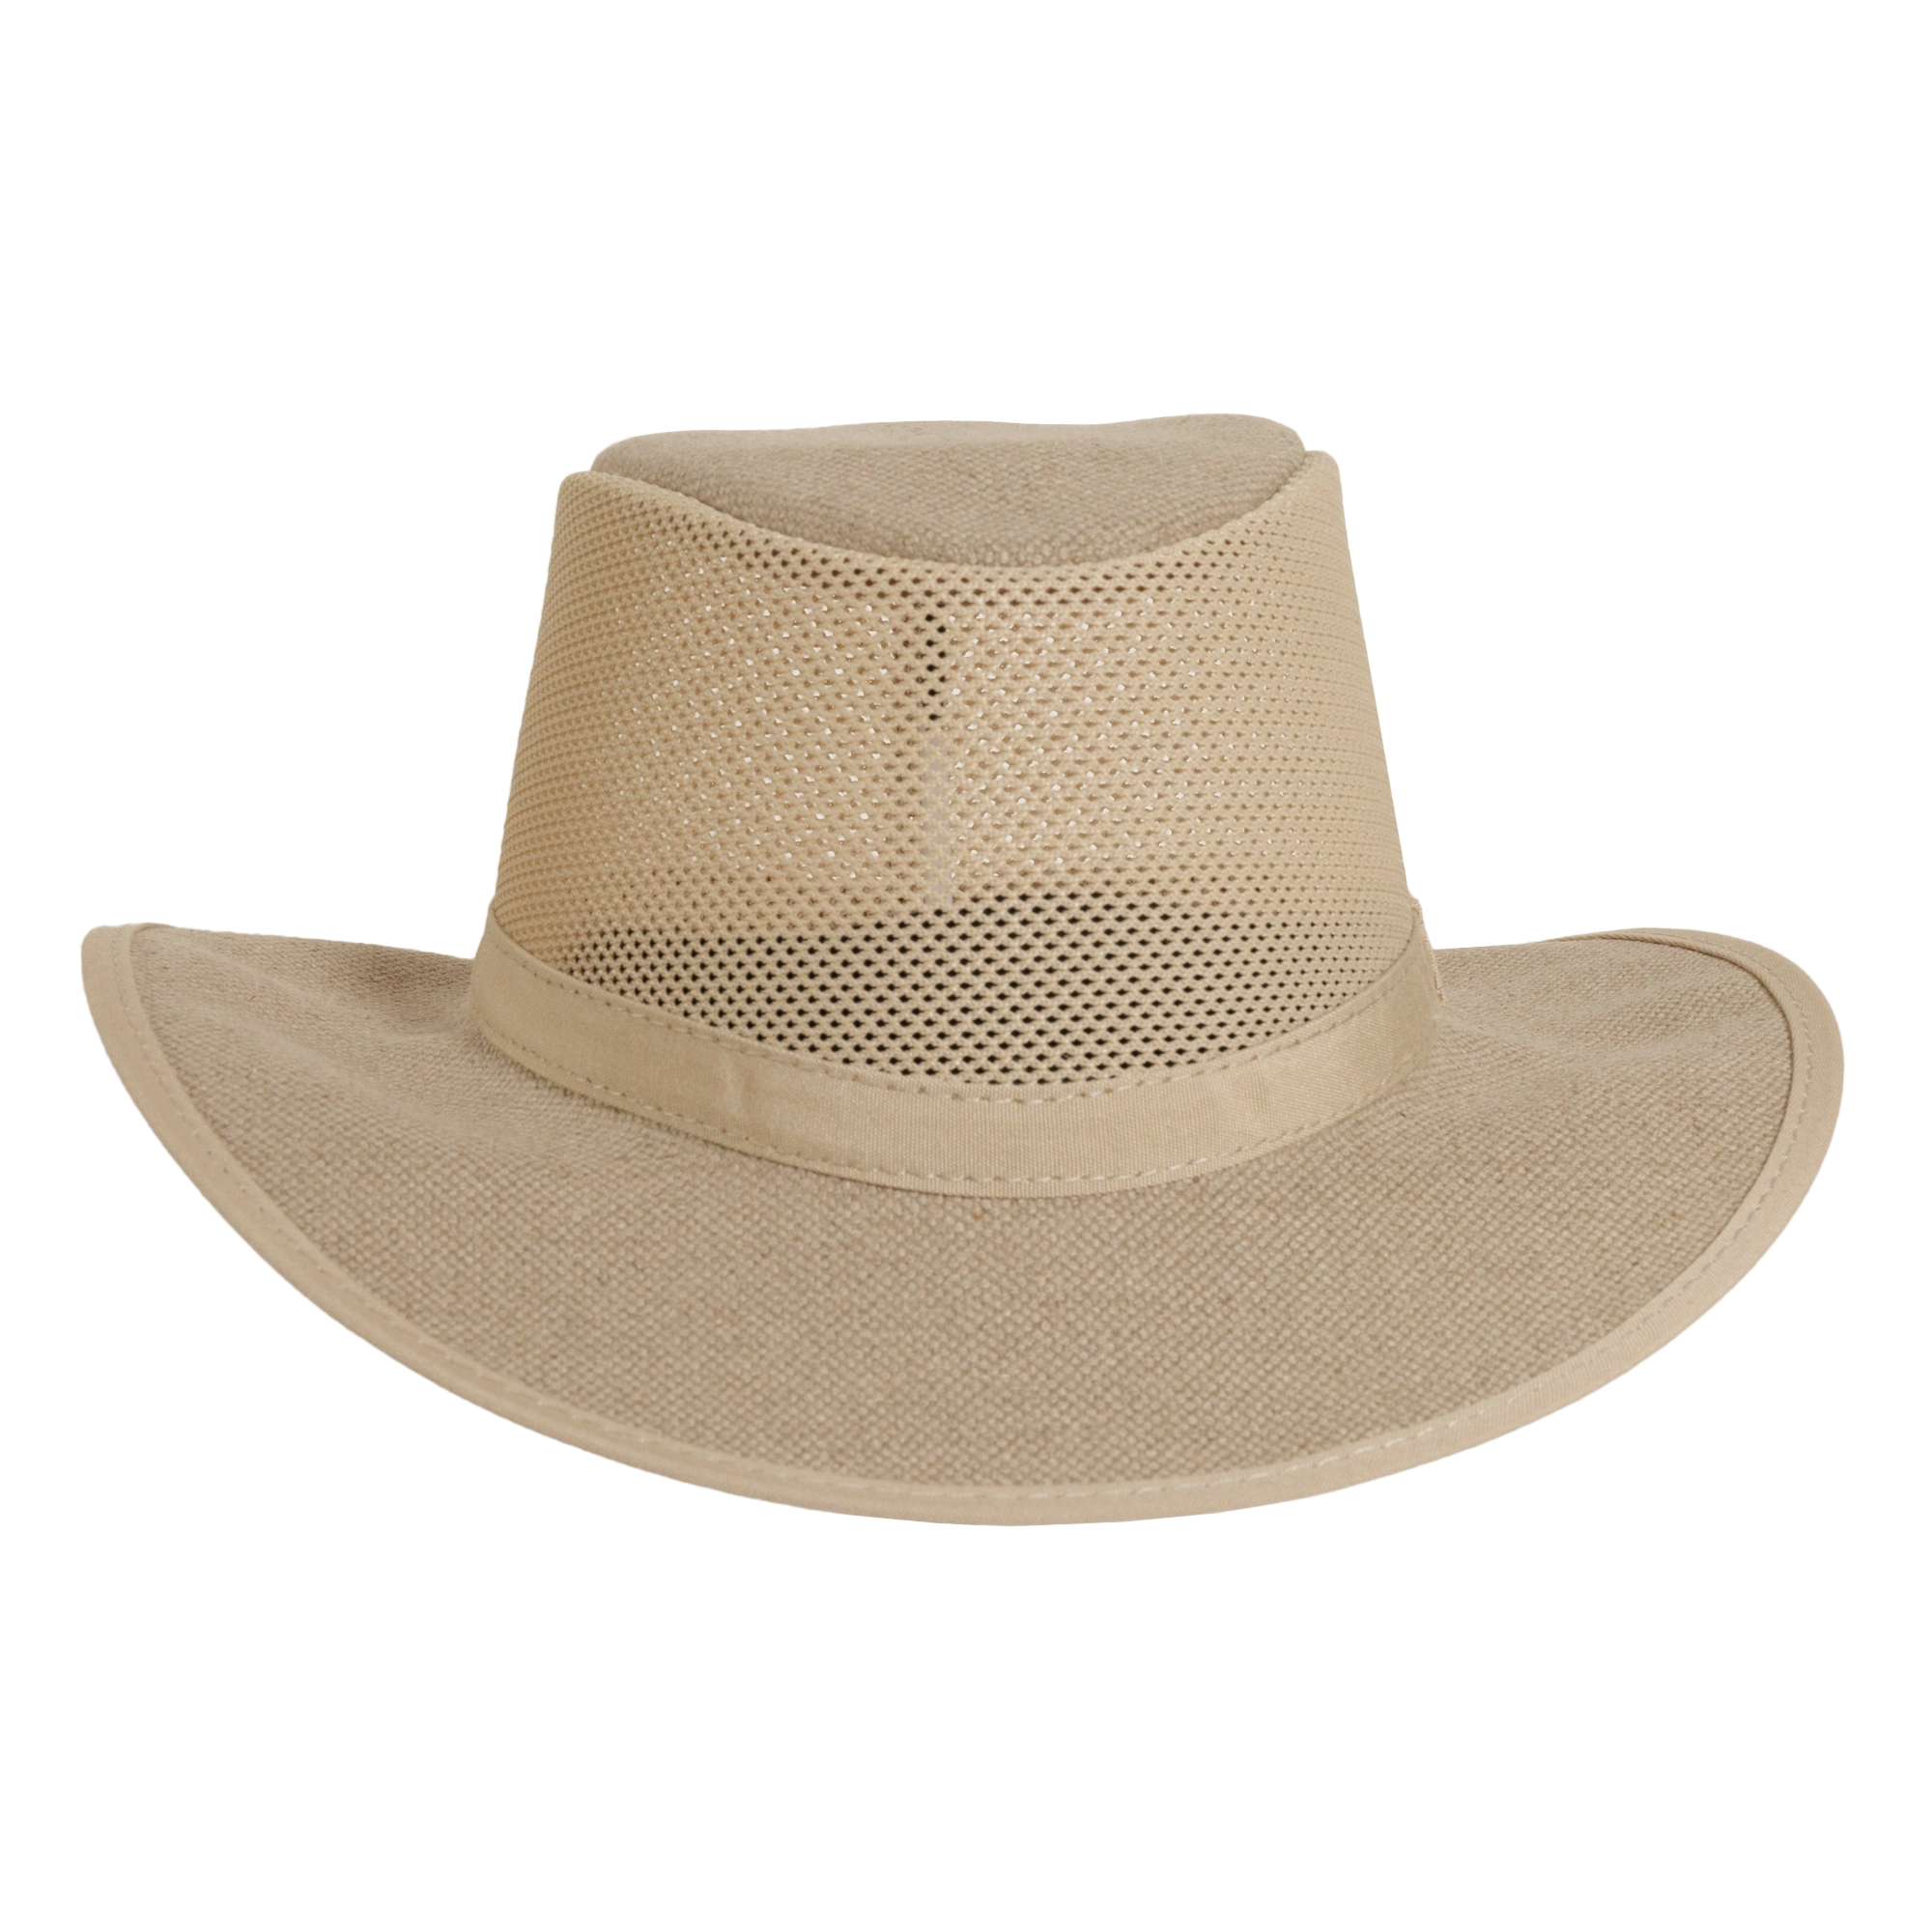 Willie Hemp Khaki Mesh Sun Hat by American Hat Makers front view